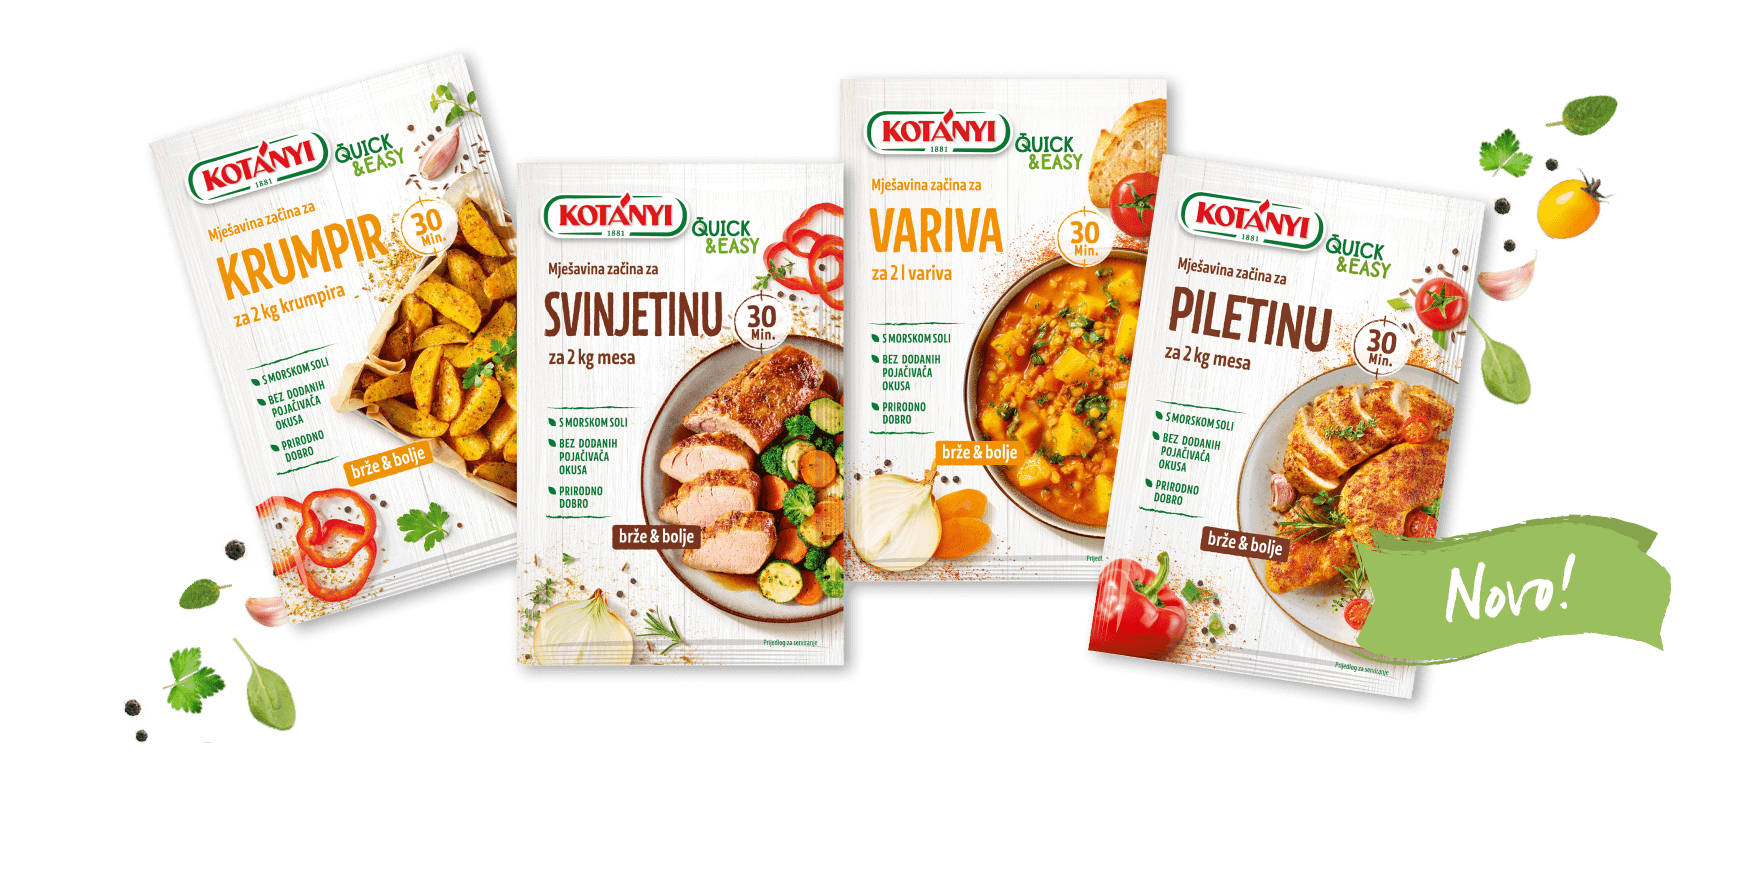 Discover a variety of spice mixes for Quick & Easy meals.